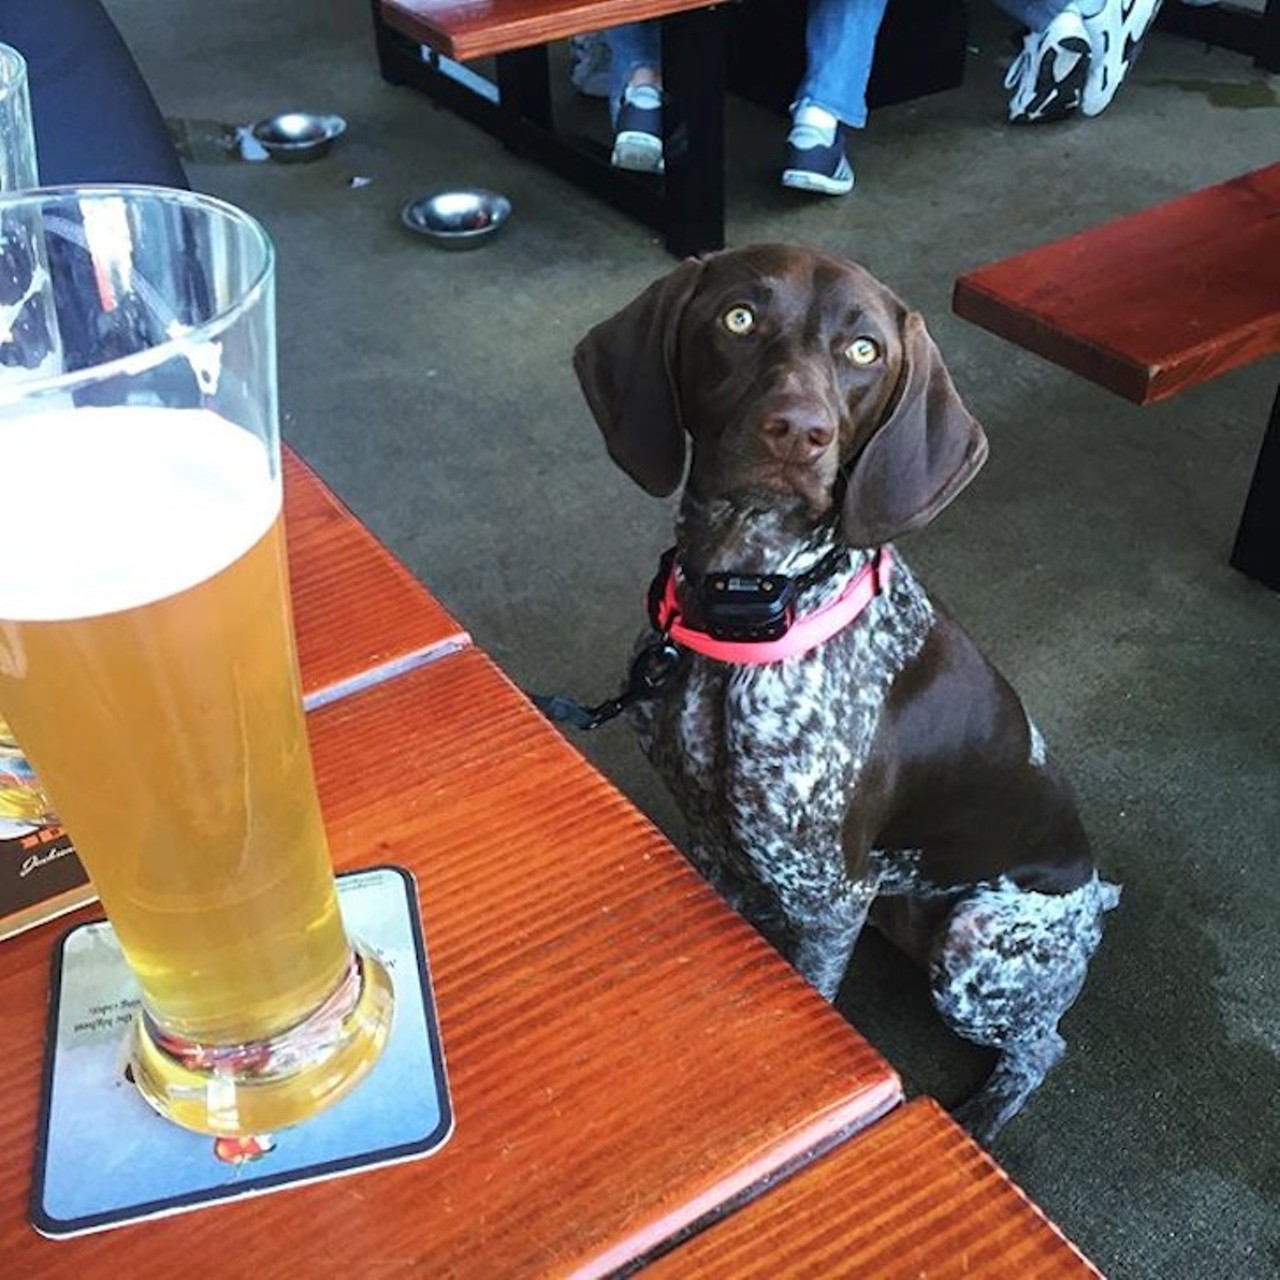 Rock & Brews
7131 Red Bug Lake Road | 407-956-4124
KISS member Gene Simmons is a huge pet-lover, so naturally when he designed his restaurant, he included a dog-friendly patio where you and your pooch can jam out. 
Photo via blakely_the_gsp/Instagram